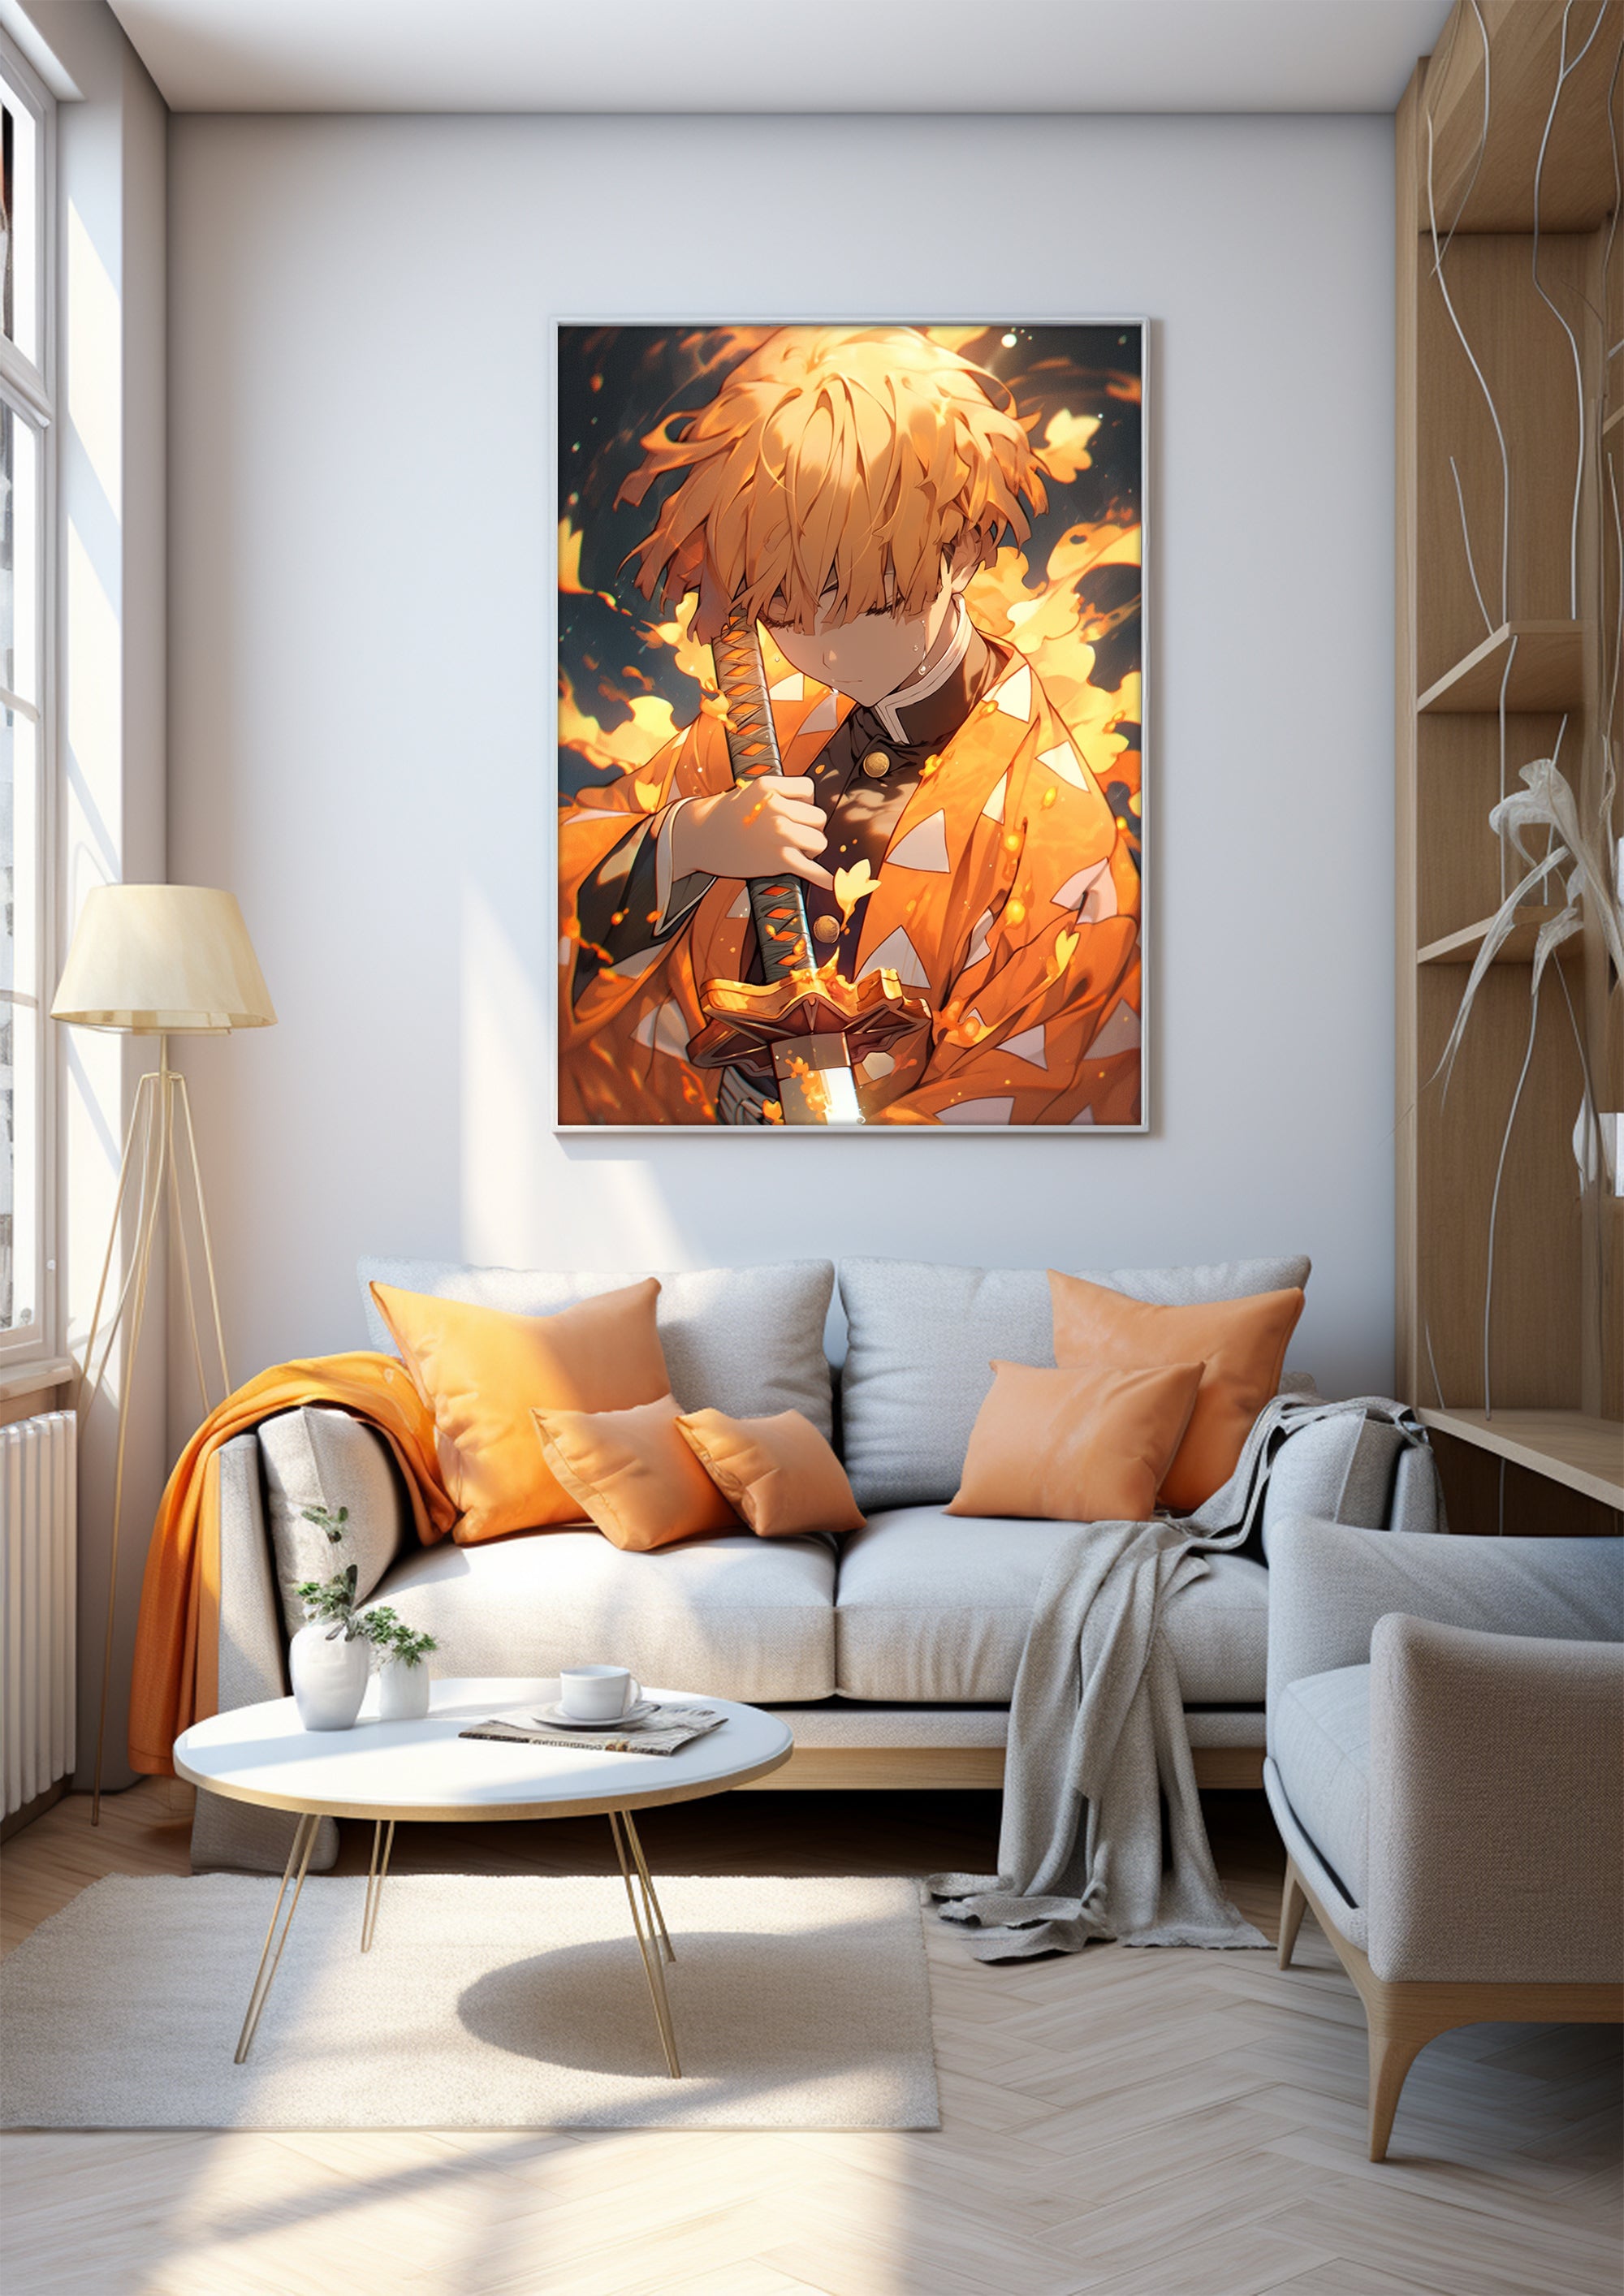 Anime Poster | Character Concept Wall Art Decor |Wall art print |Demon Slayer|Wallpapers，Cell phone screen wallpaper， game room, industrial decor，Art Deco Wall Gifts|PRINTABLE Art |Digital Download